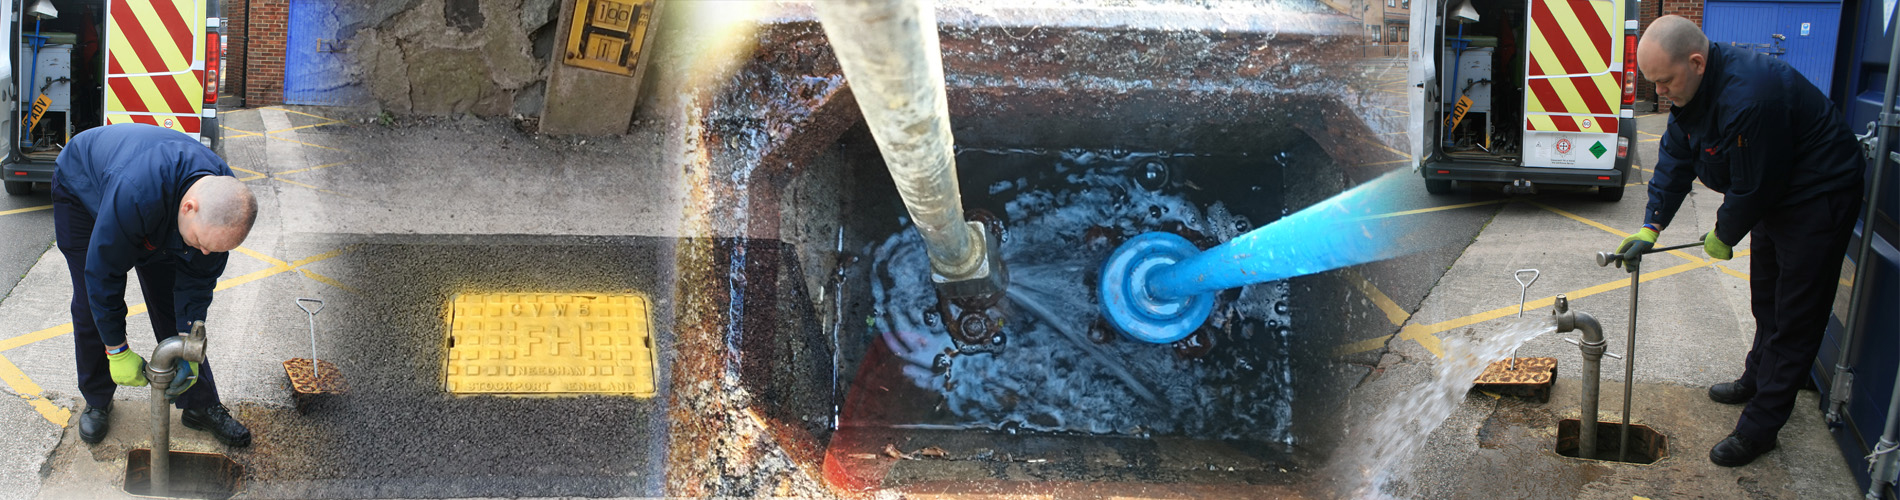 Photo showing work at a fire hydrant